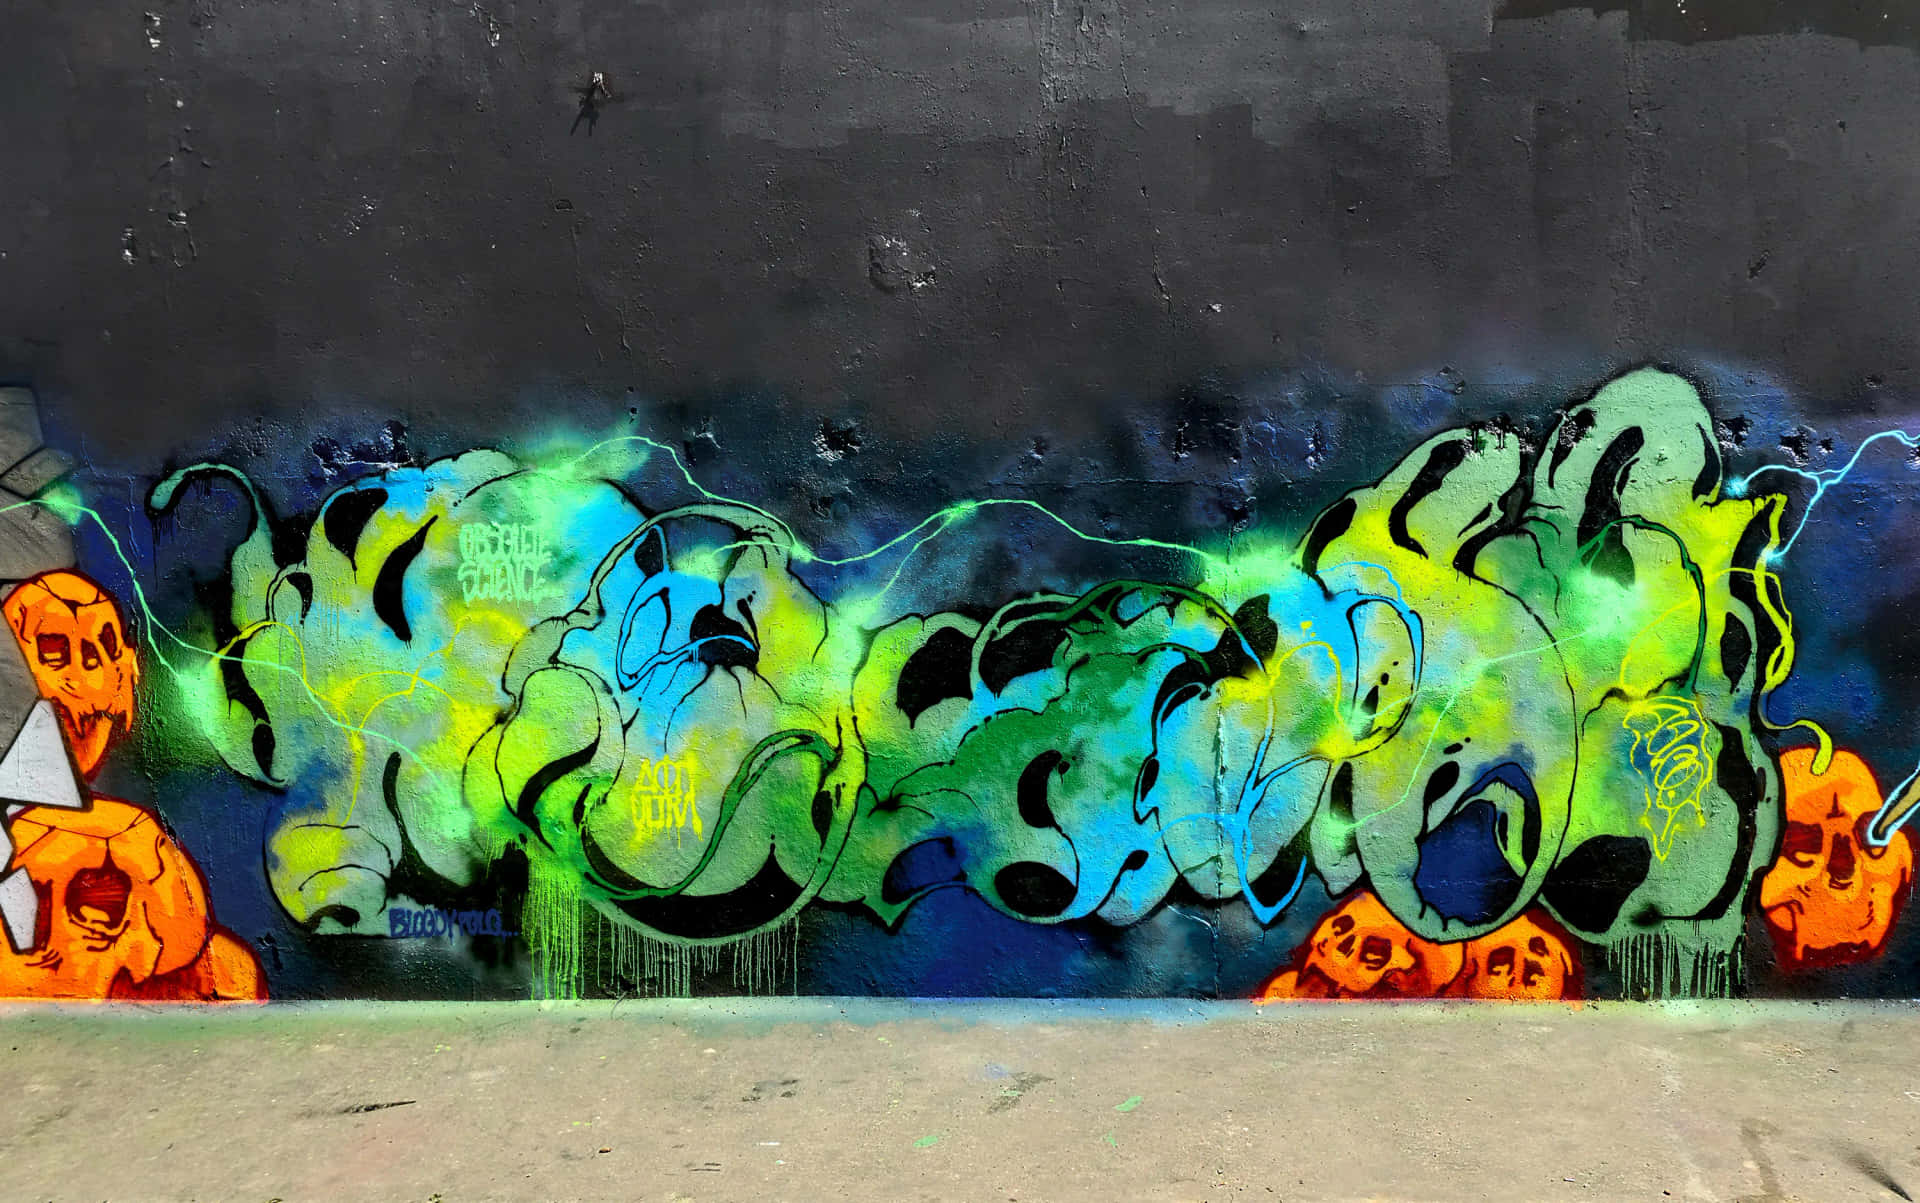 Bold Colors and Brush Strokes Fill This Piece of Graffiti Art